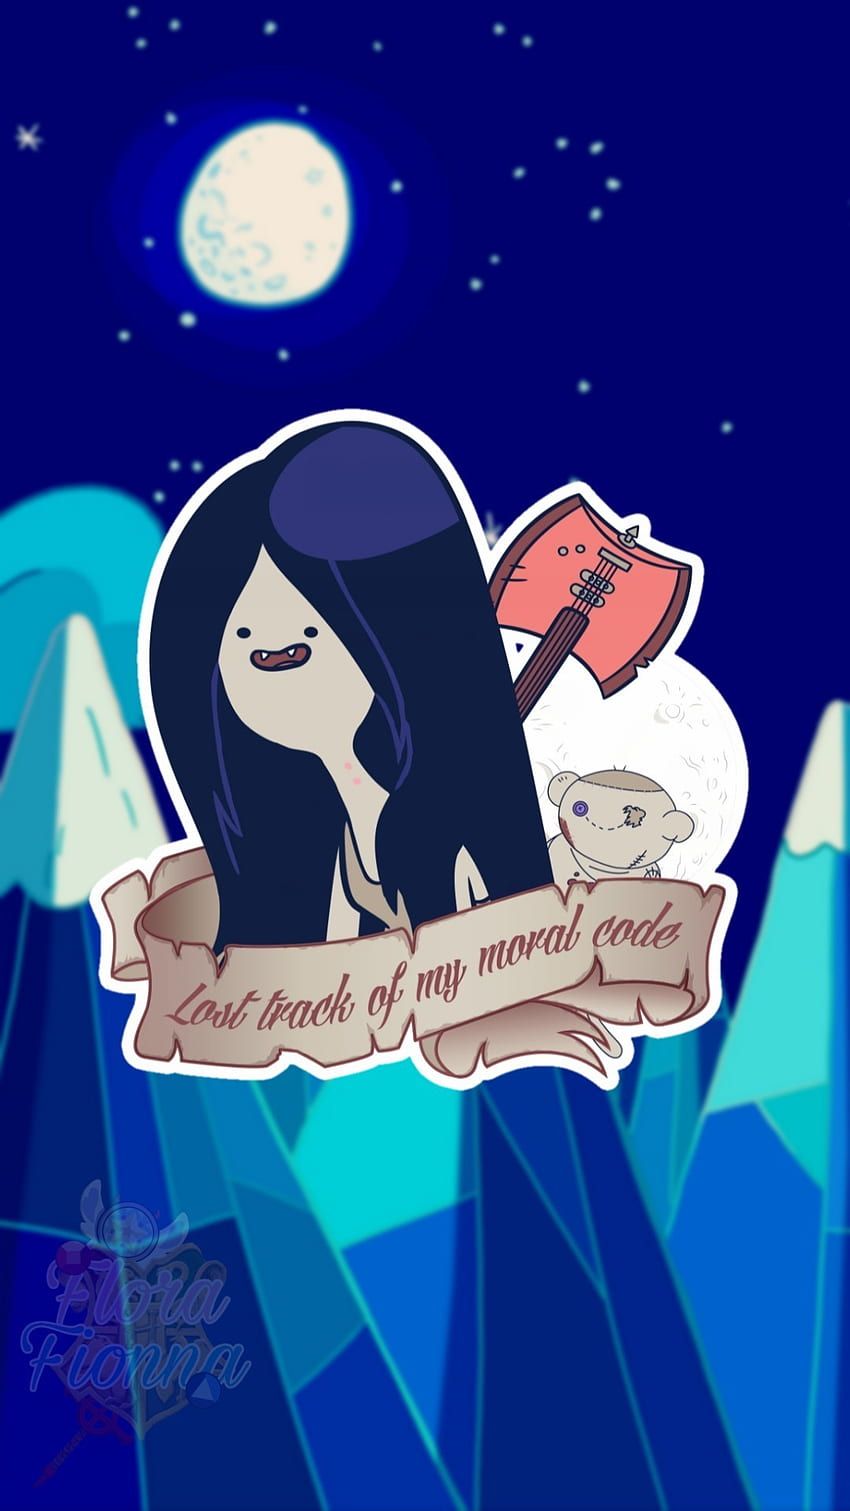 Adventure Time sticker pack. - Adventure Time